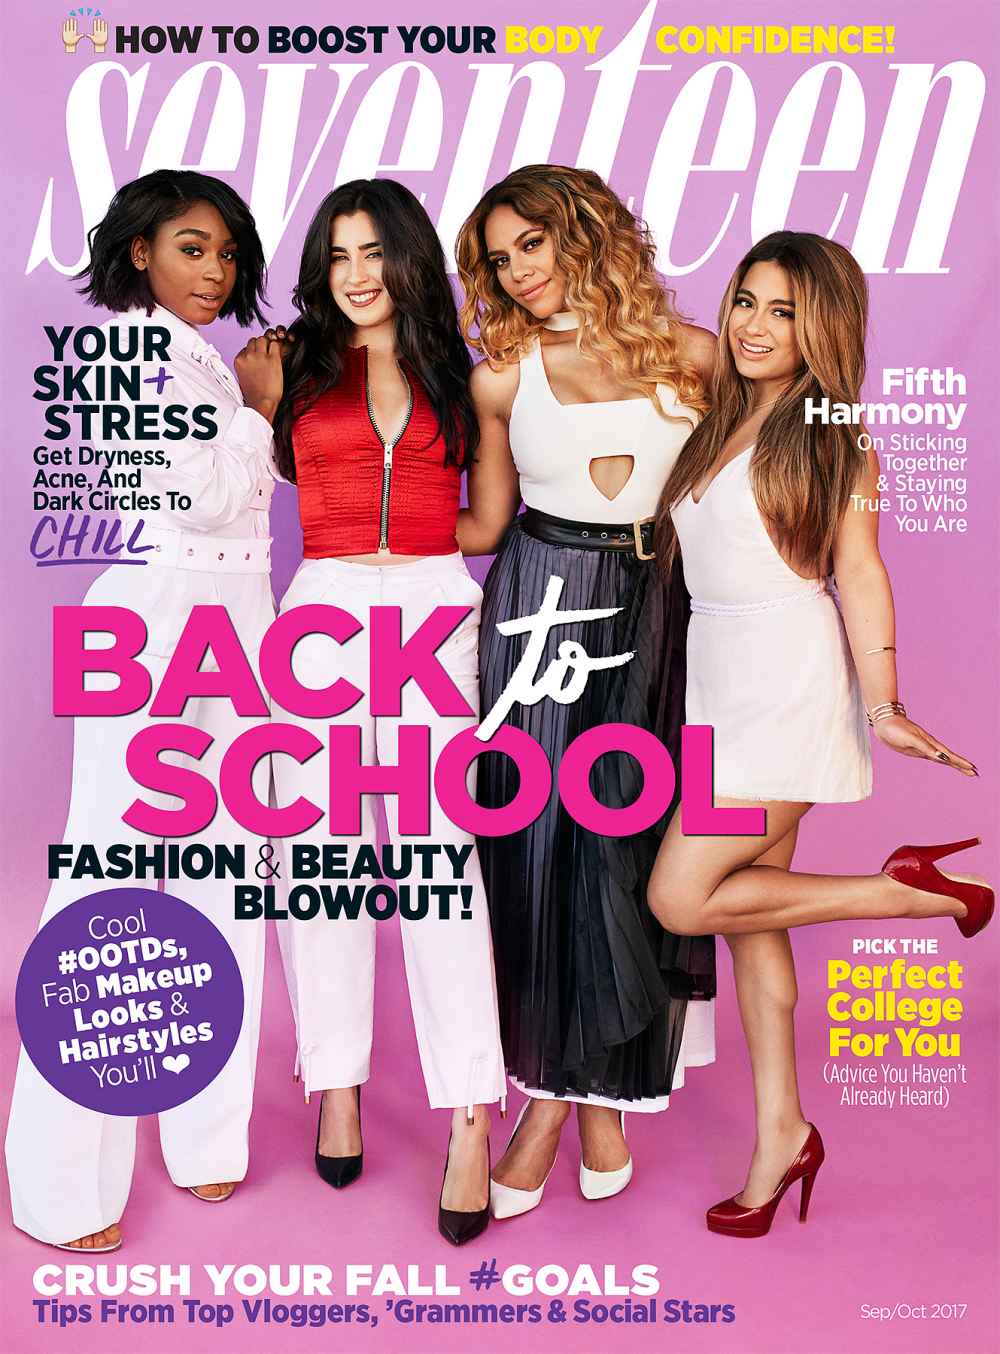 Fifth Harmony on the cover of Seventeen.